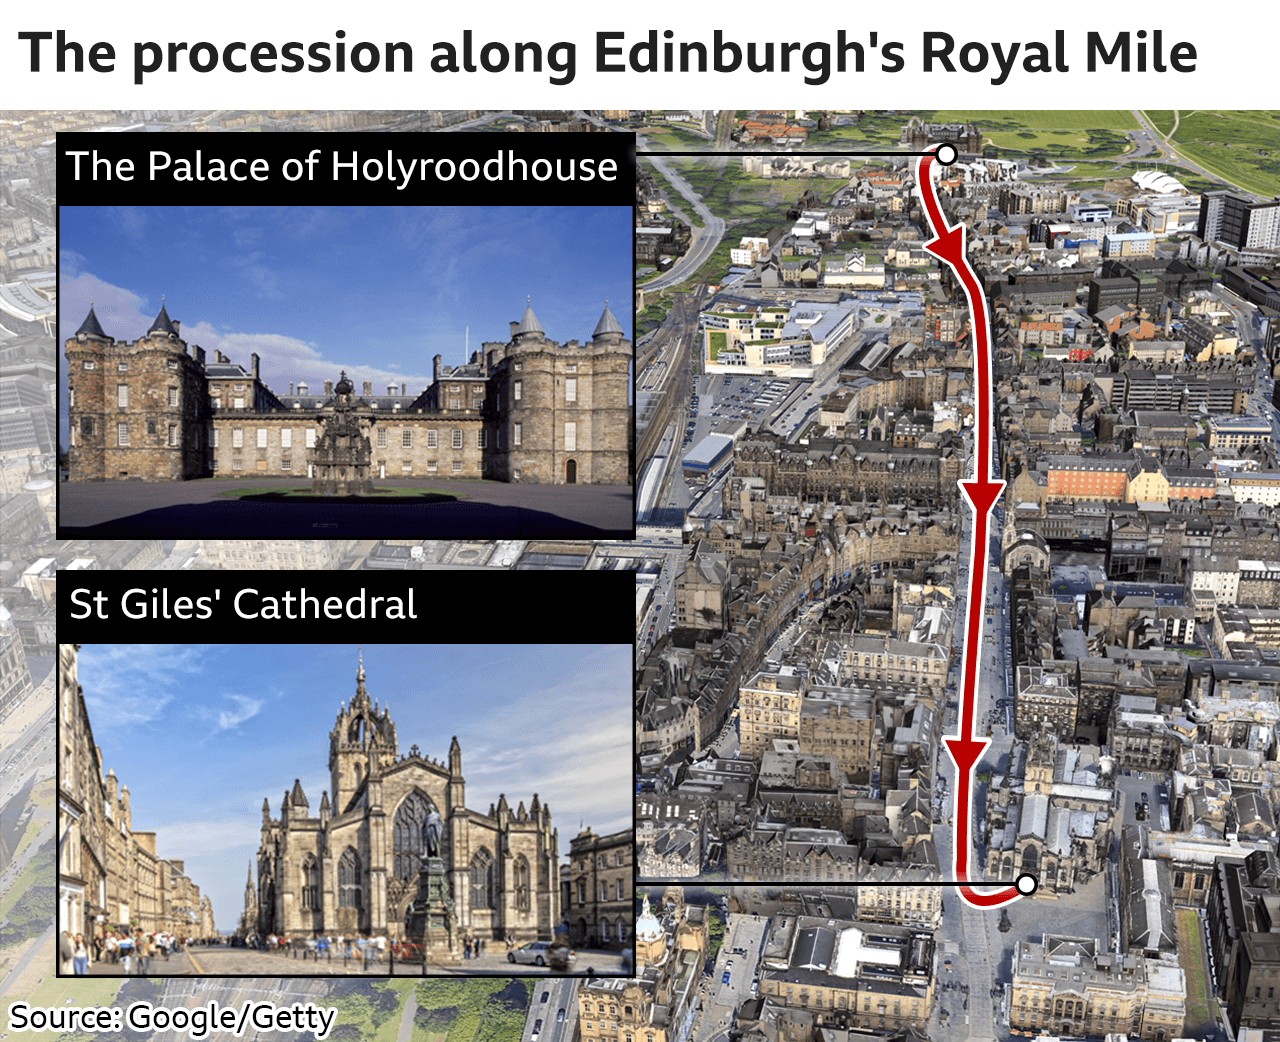 Map showing procession route from the Palace of Holyroodhouse to St Giles' Cathedral